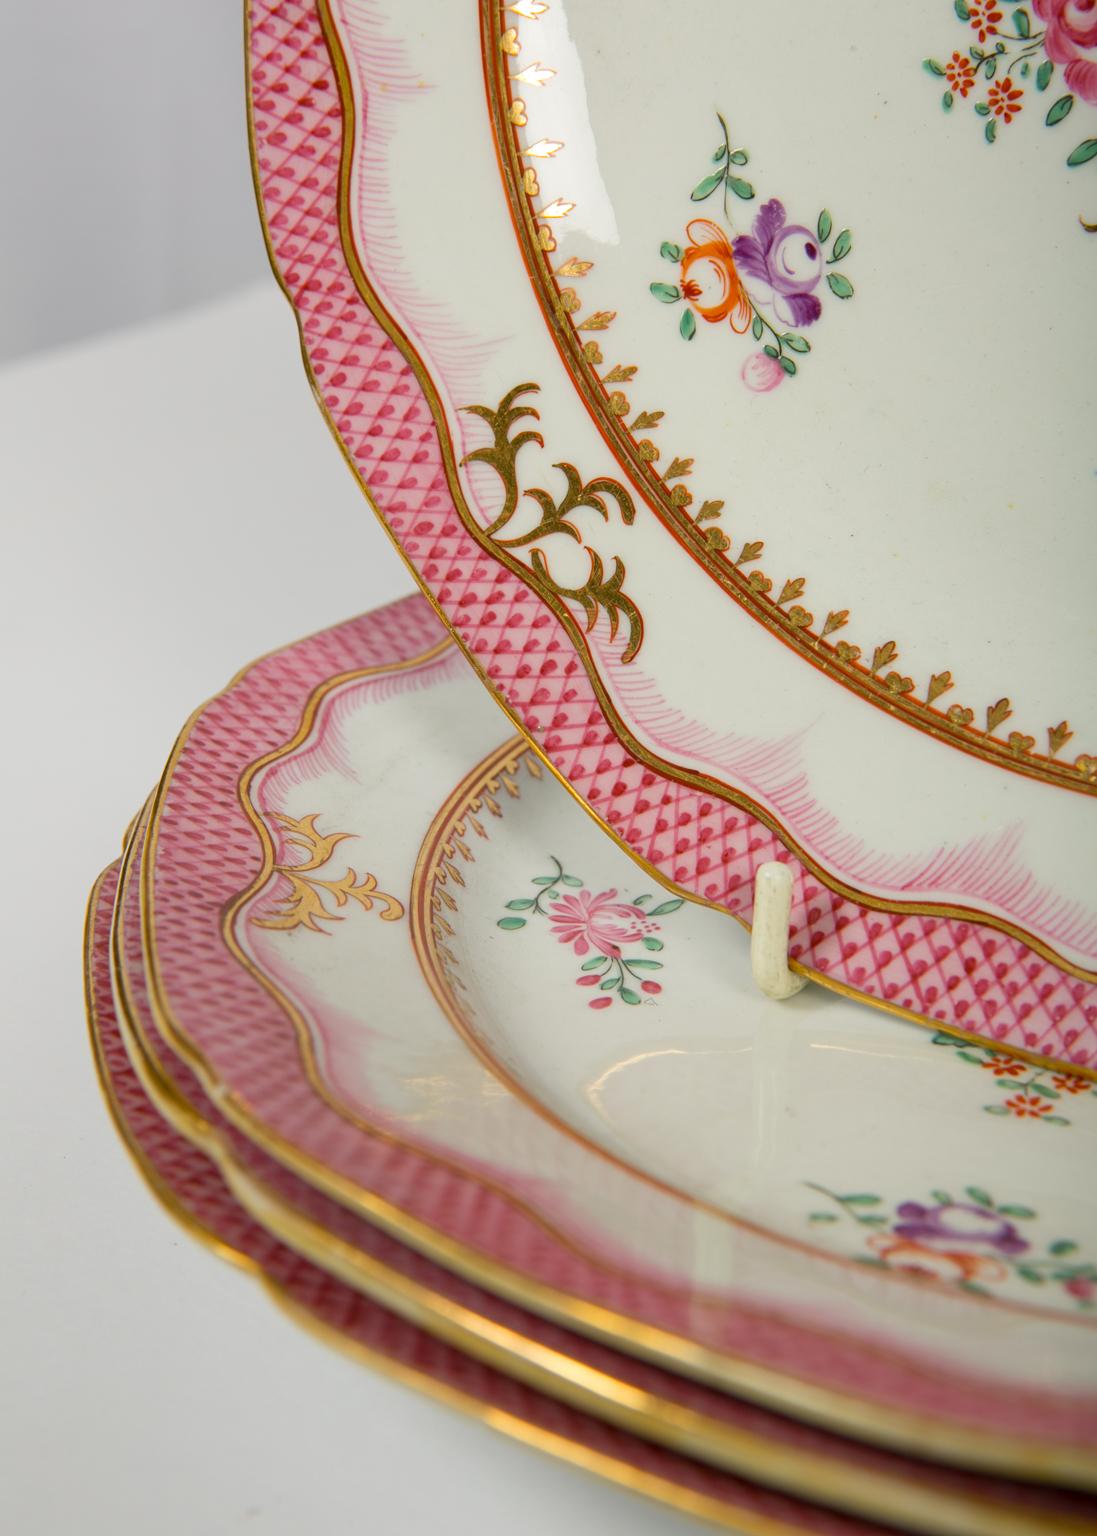 A set of four pink, antique Chamberlains Worcester dishes painted in the Famille Rose style 
circa 1830. The center of each dish shows a bouquet of flowers including a peony, a chrysanthemum, and other flowers painted in soft pink with purple,